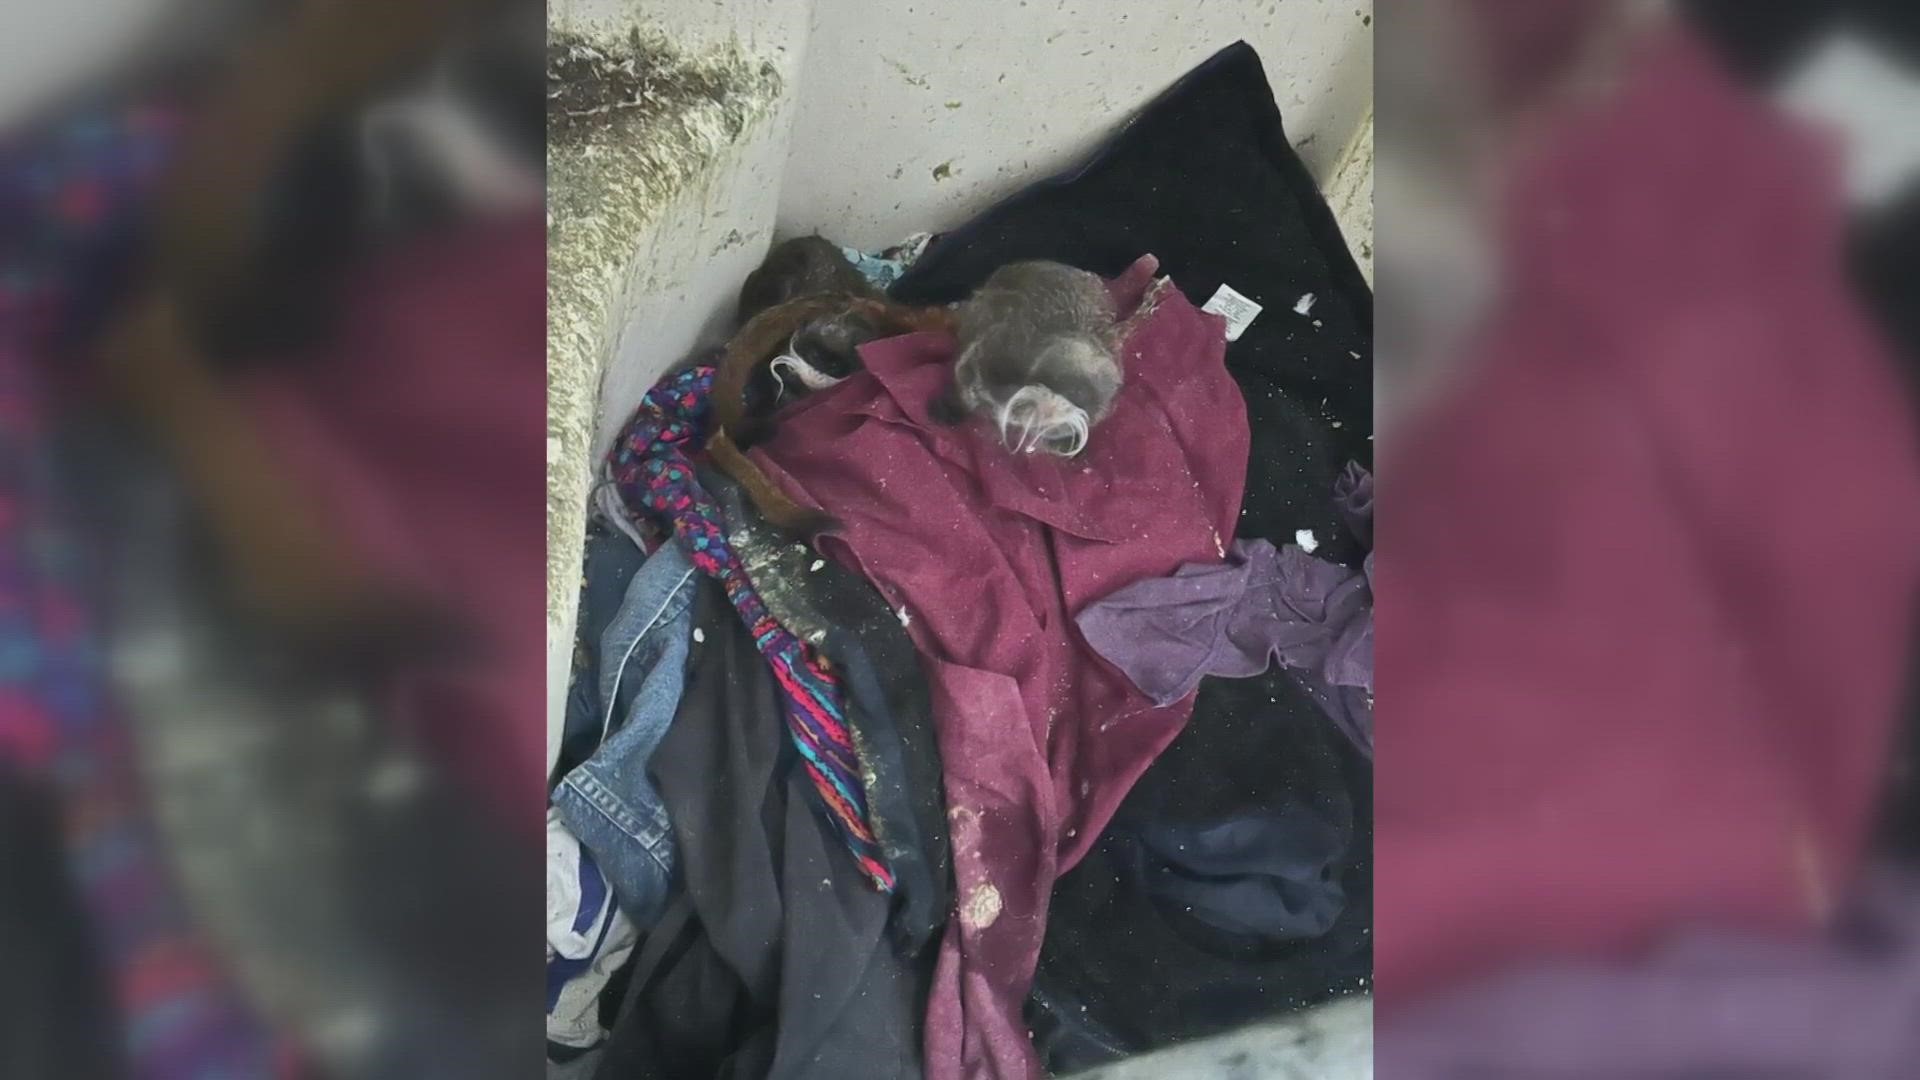 The two missing monkeys were found in Lancaster in an abandoned church.